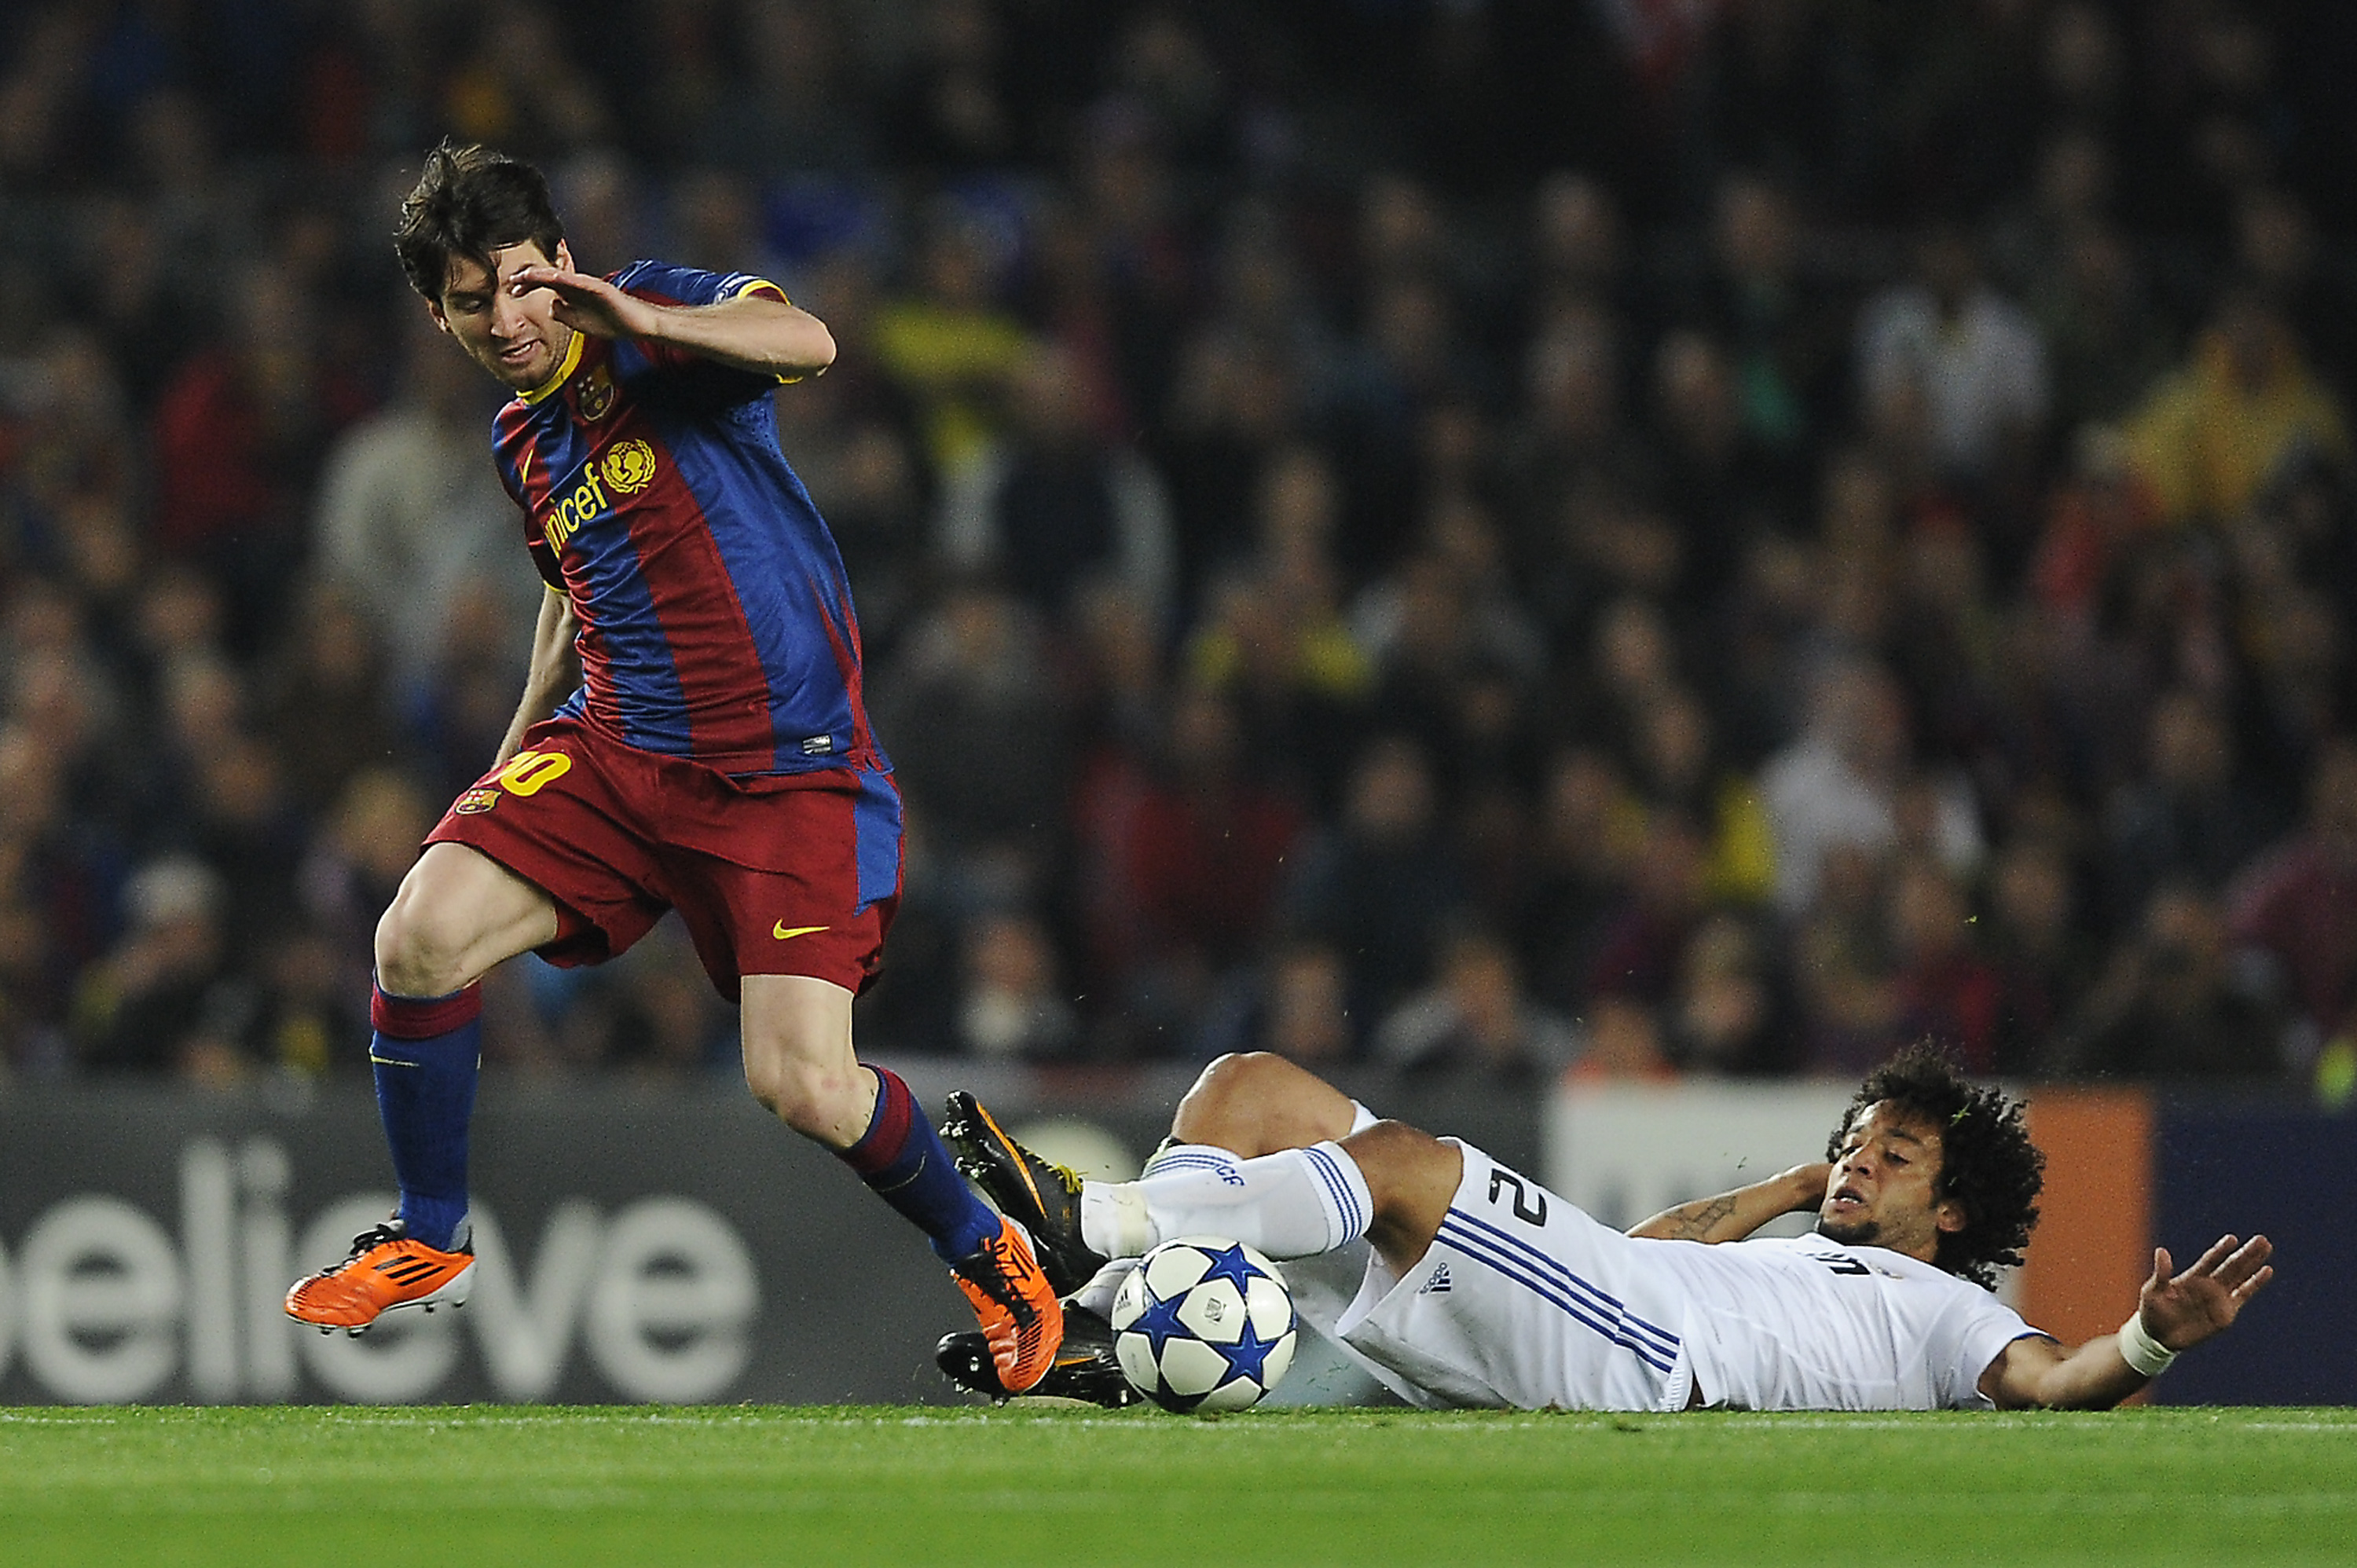 BARCELONA, SPAIN - MAY 03:  Lionel Messi of FC Barcelona (L) fights for the ball against Marcelo Real Madrid during the UEFA Champions League Semi Final second leg match between Barcelona and Real Madrid at the Camp Nou on May 3, 2011 in Barcelona, Spain.